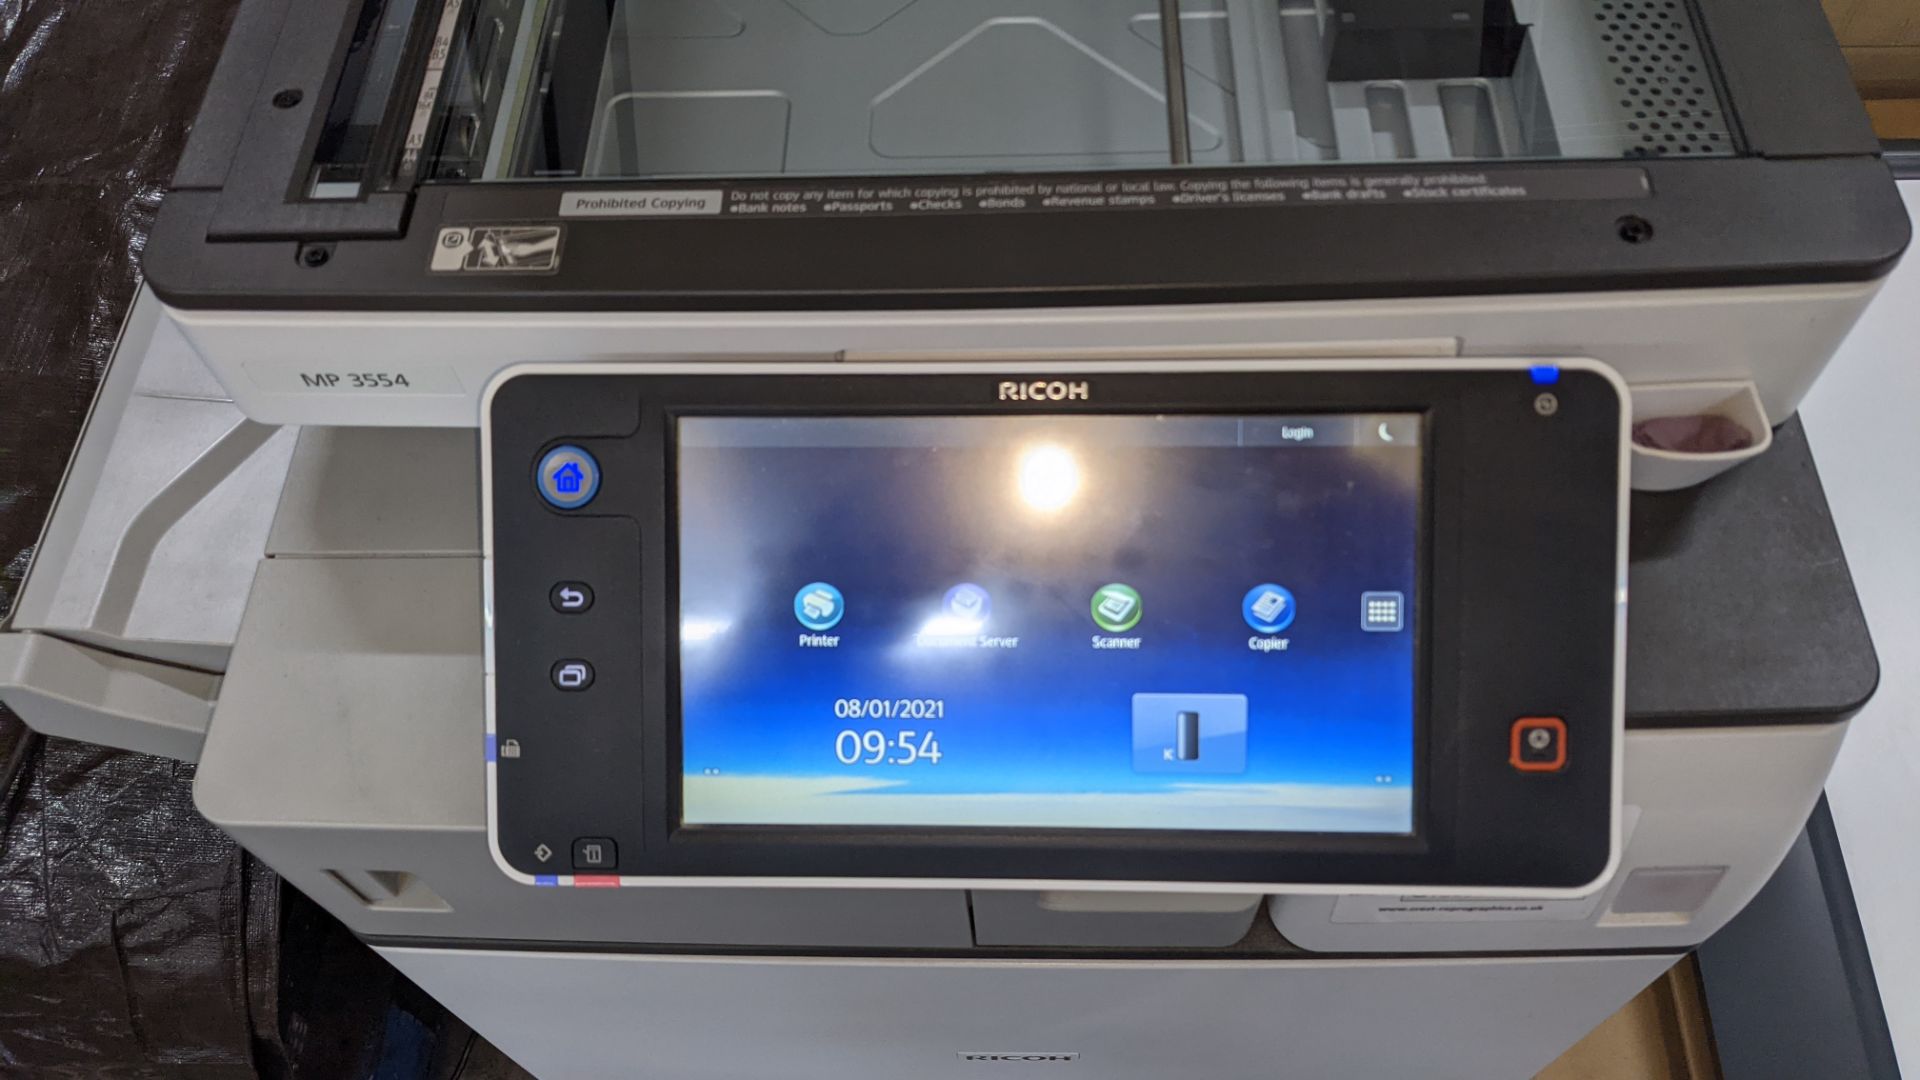 Ricoh model MP3554 floor standing multifunction copier with ADF, large touchscreen display, finishin - Image 6 of 12